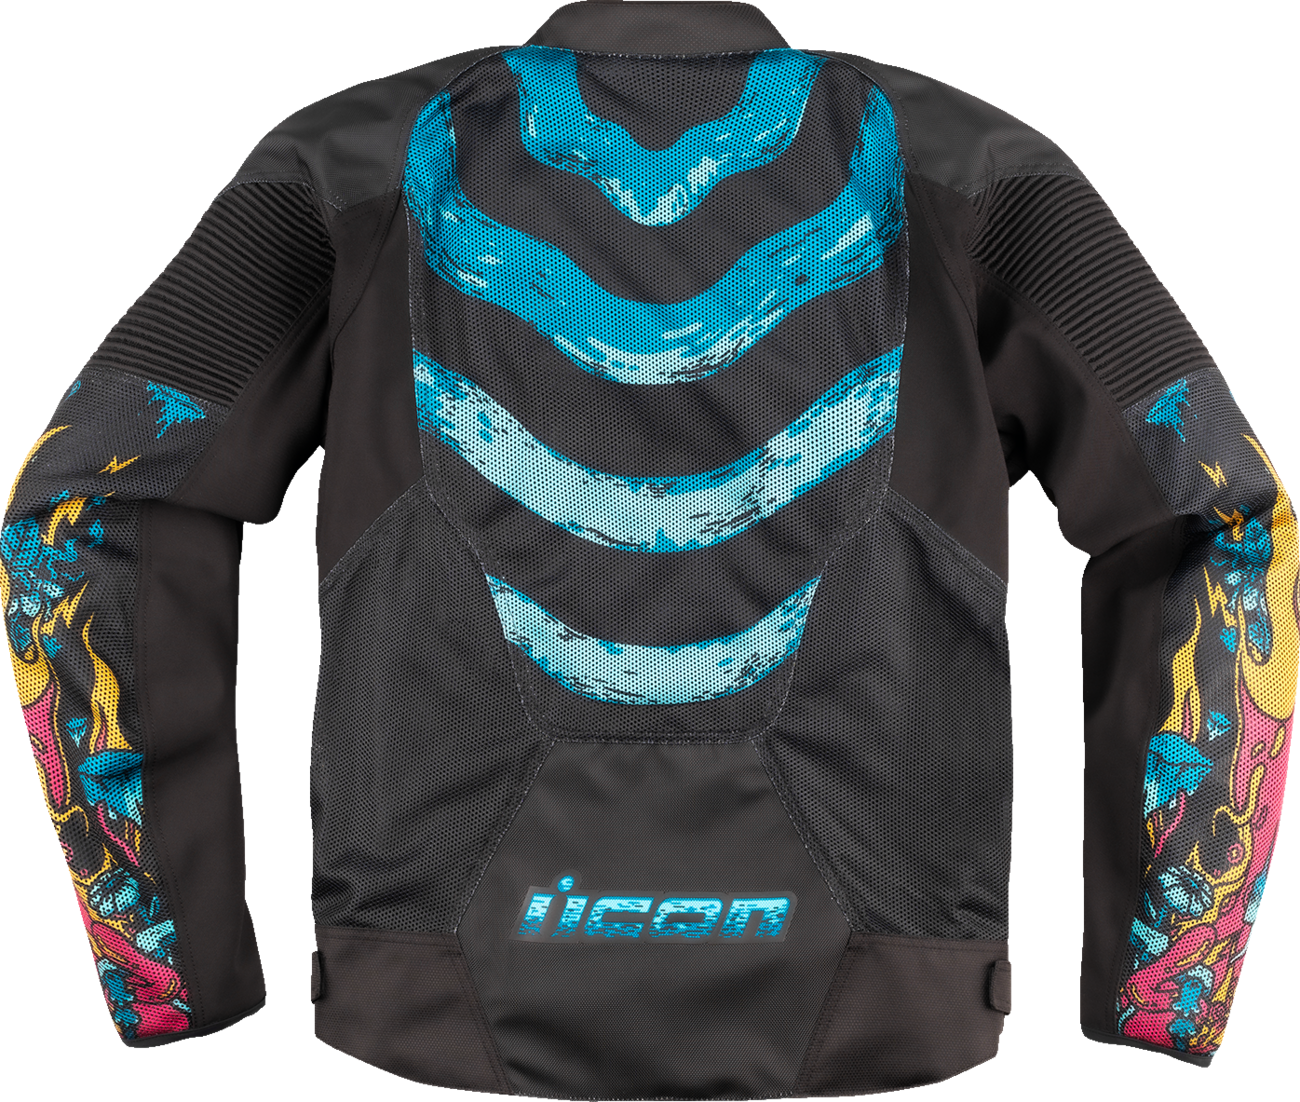 ICON Overlord3 Mesh Munchies™ Jacket - Teal - Small 2820-6724